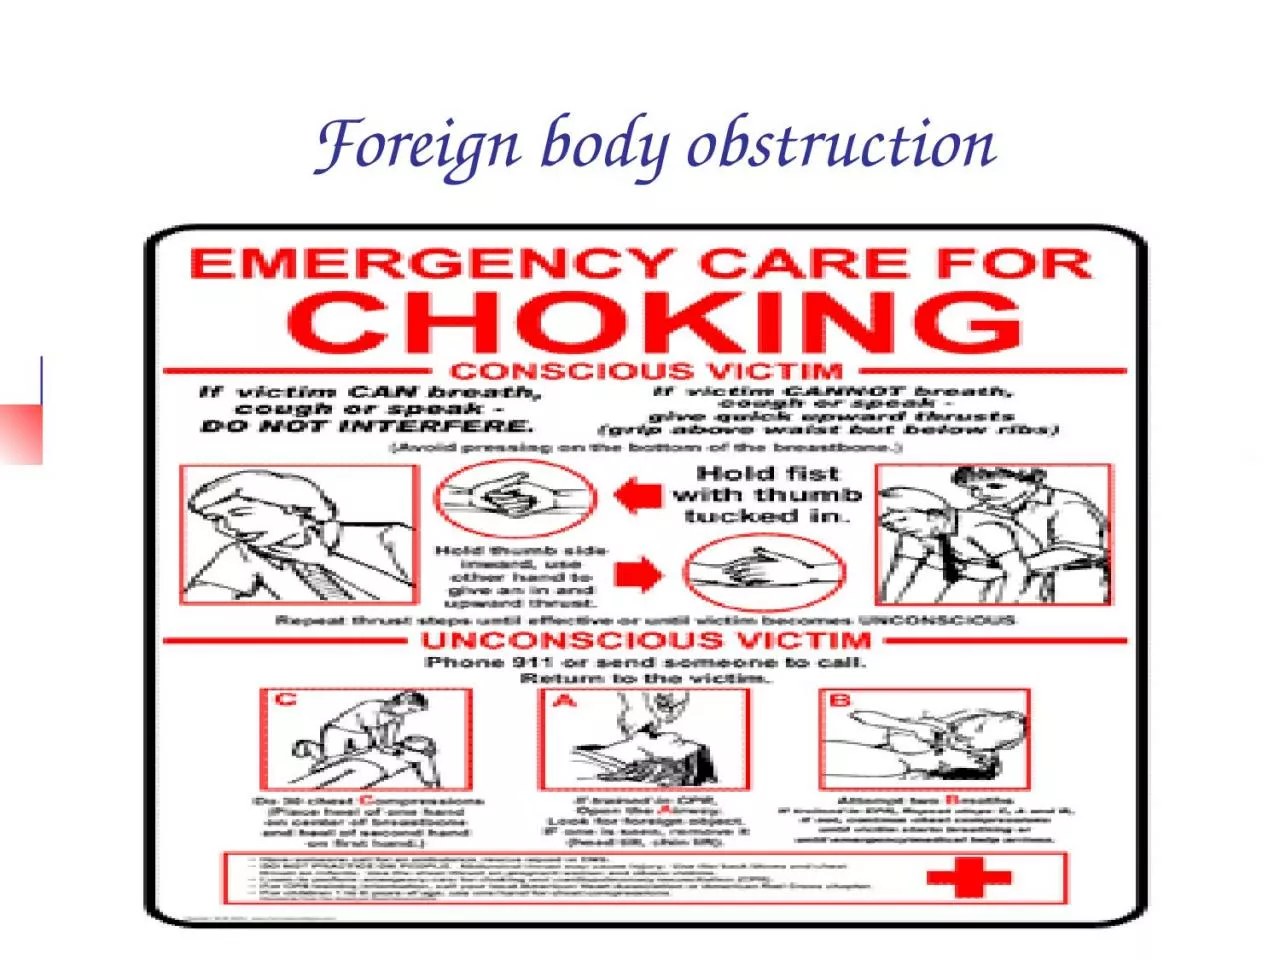 Foreign body obstruction